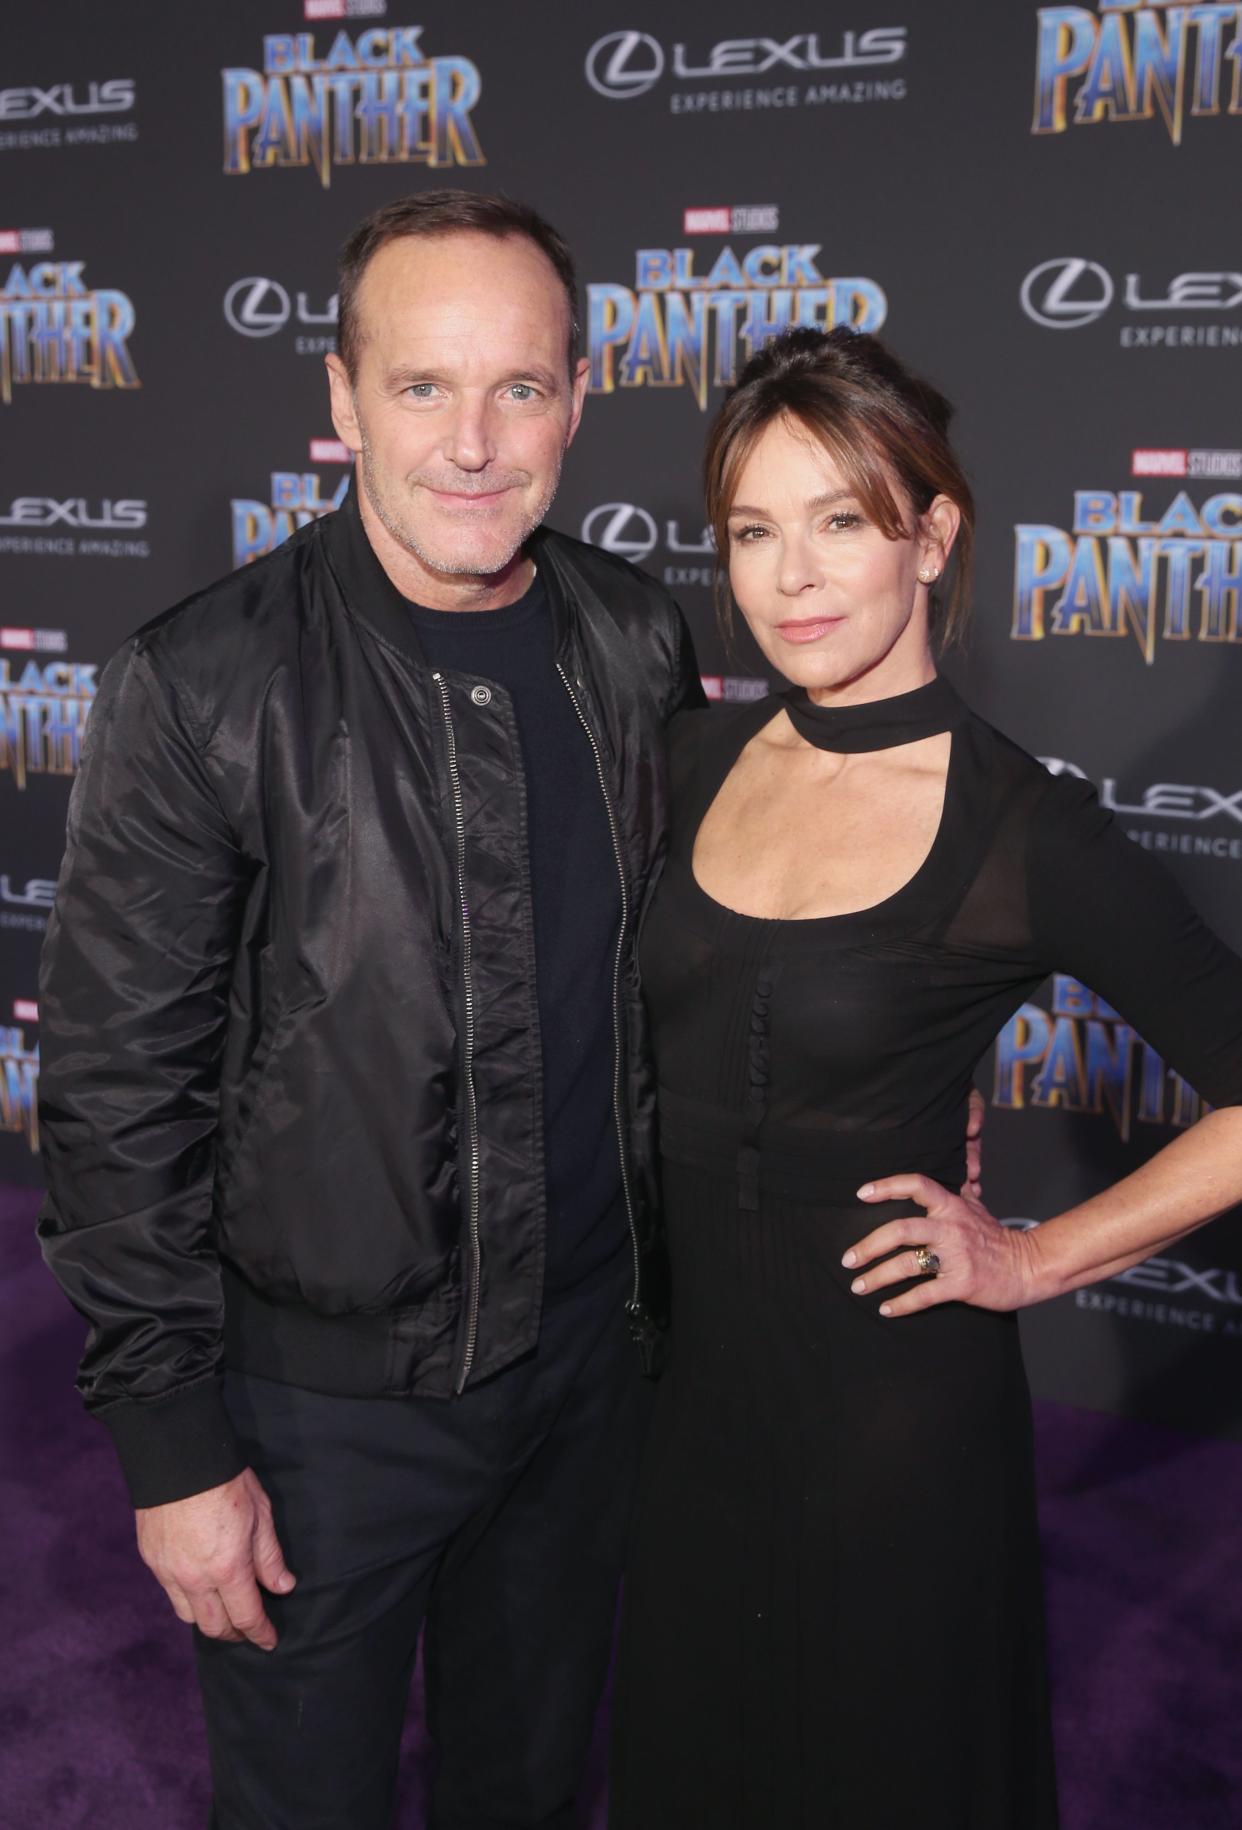 After 19 years of marriage, Clark Gregg and Jennifer Grey announced their intent to divorce in a heartfelt Instagram post on July 3, 2020. “After 19 years together, we separated in January, knowing we’d always be a family who loves, values and cares for each other,” Gregg captioned a photo of the pair. “We recently made the difficult decision to divorce, but we remain close and are deeply grateful for the life we’ve shared and the wonderful daughter we’ve raised. - Jennifer and Clark P.S. Totally crying as we post this.” The Marvel Cinematic Universe actor and the “Dirty Dancing” actress wed in 2001 and are parents to daughter Stella.